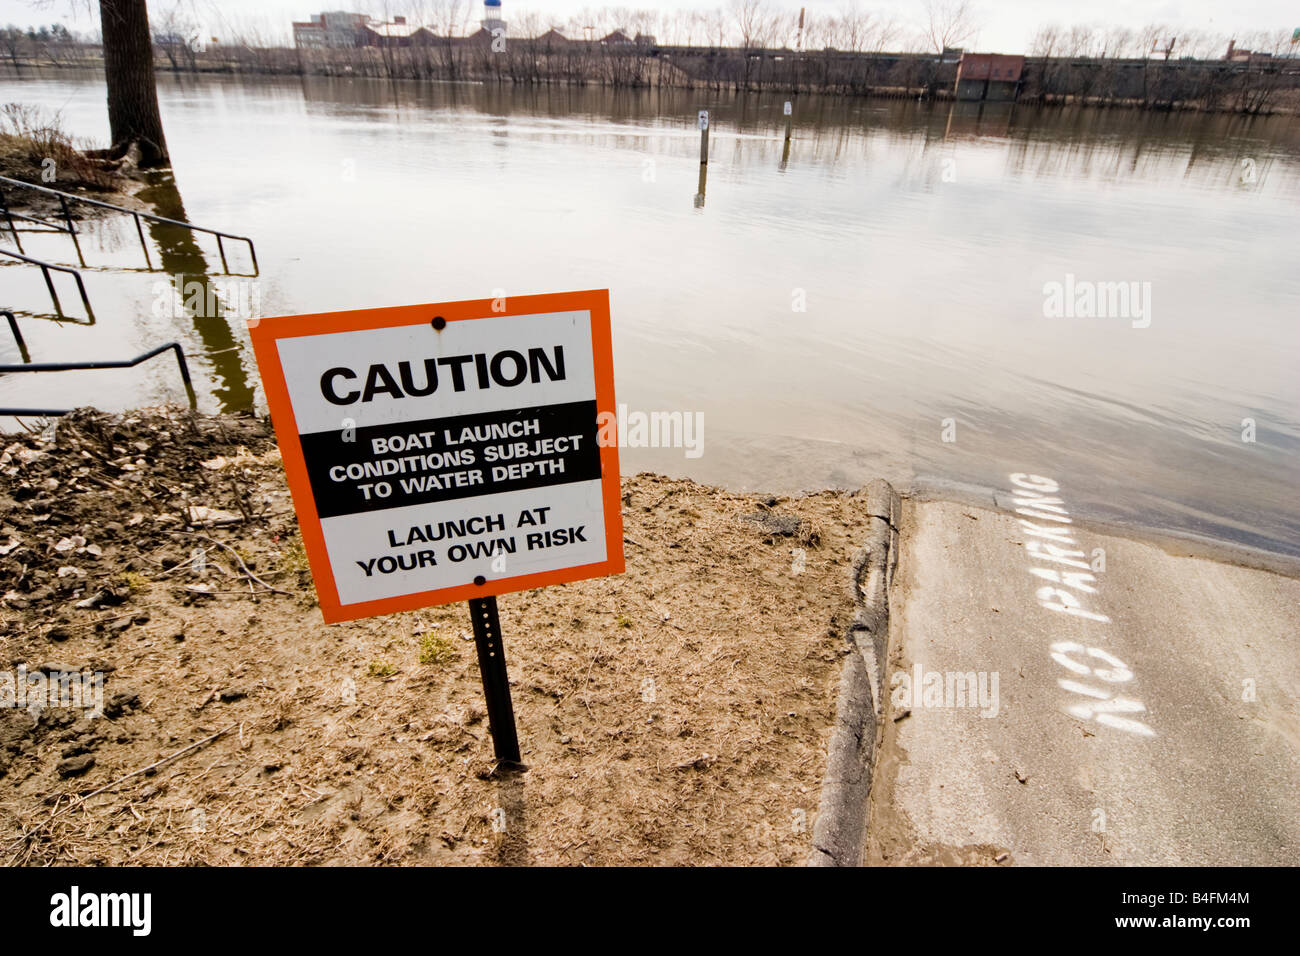 CAUTION sign near a boat launch at an overflowing river Stock Photo